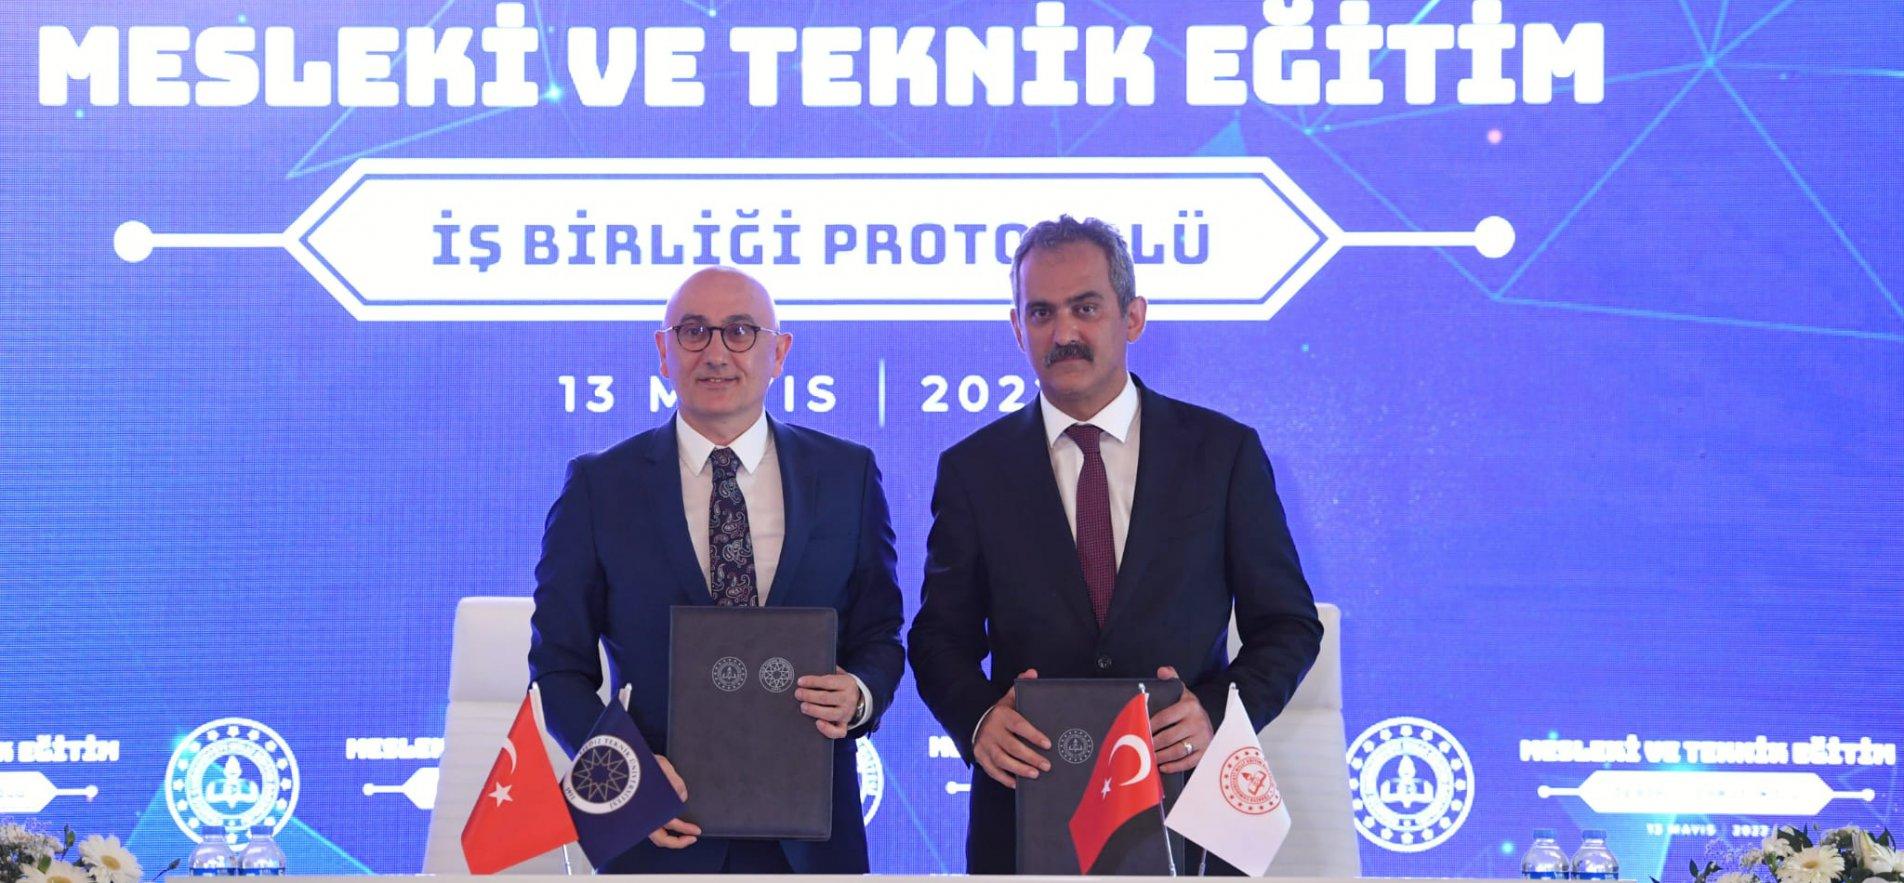 COOPERATION IN VOCATIONAL EDUCATION WITH THE YILDIZ TECHNICAL UNIVERSITY